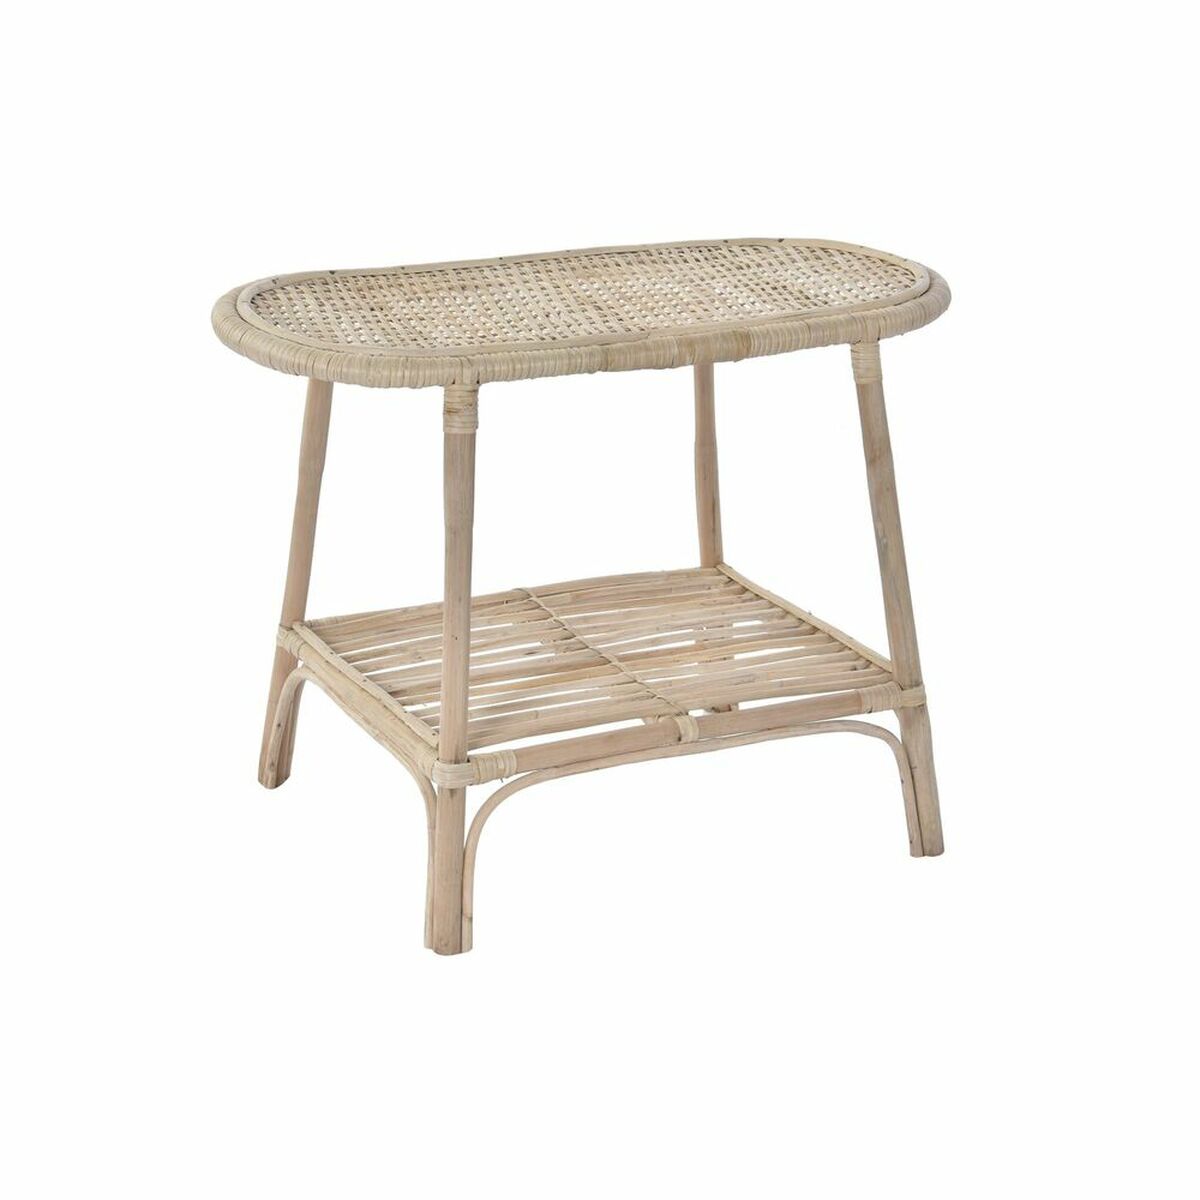 Oval Side Table in Rattan (61 x 30 x 46 cm)